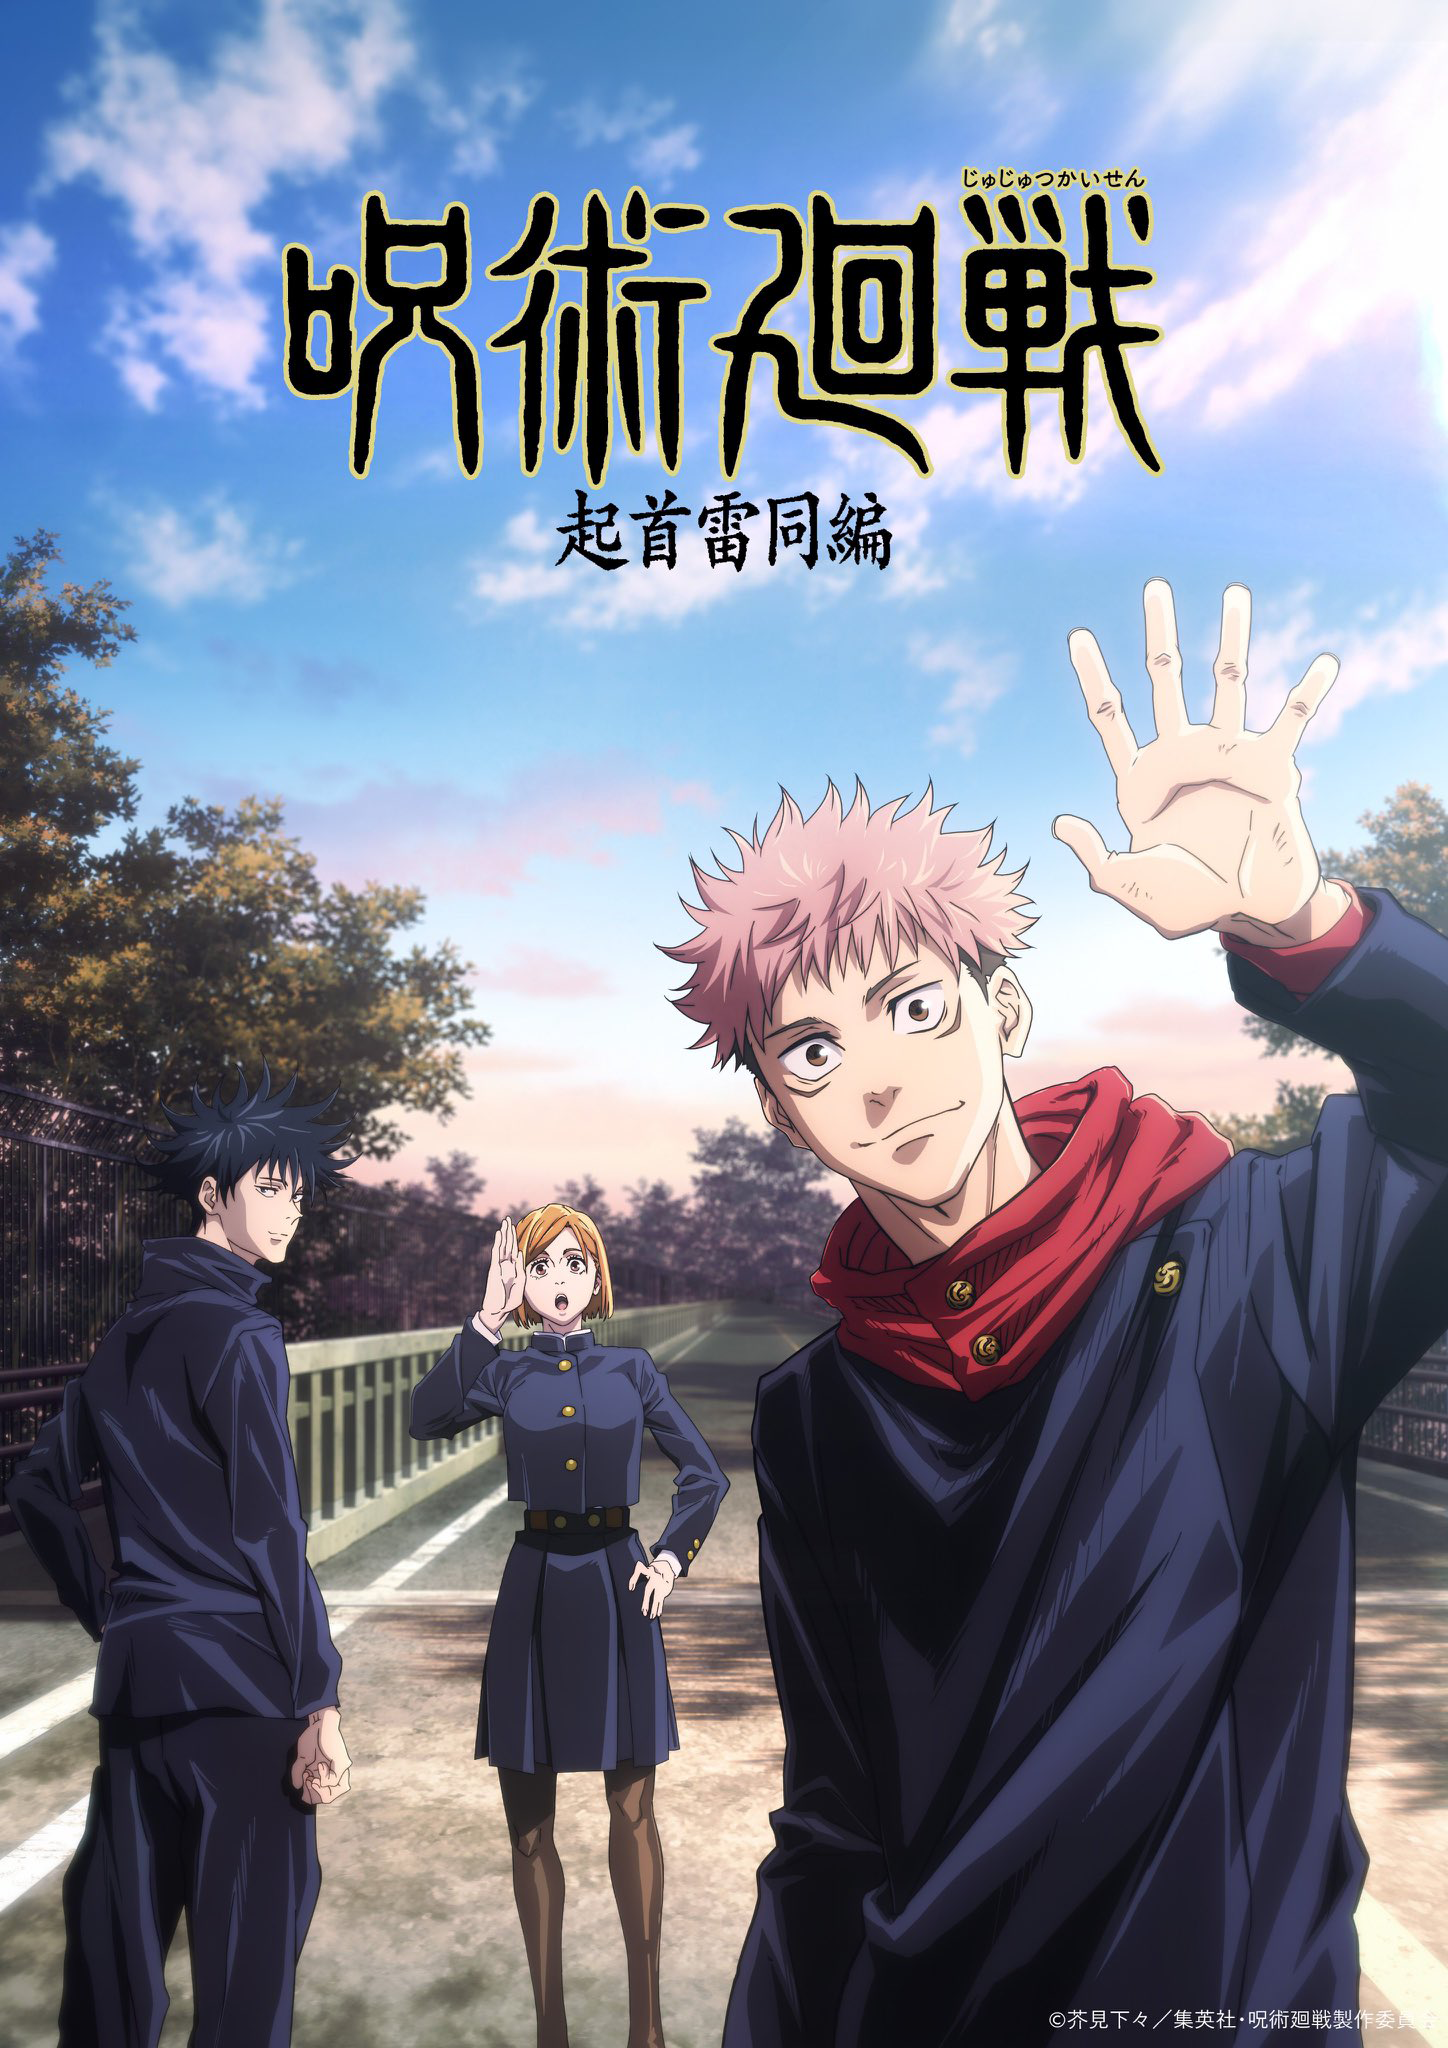 Jujutsu Kaisen season 2 crosses over with Demon Slayer in a way nobody  imagined